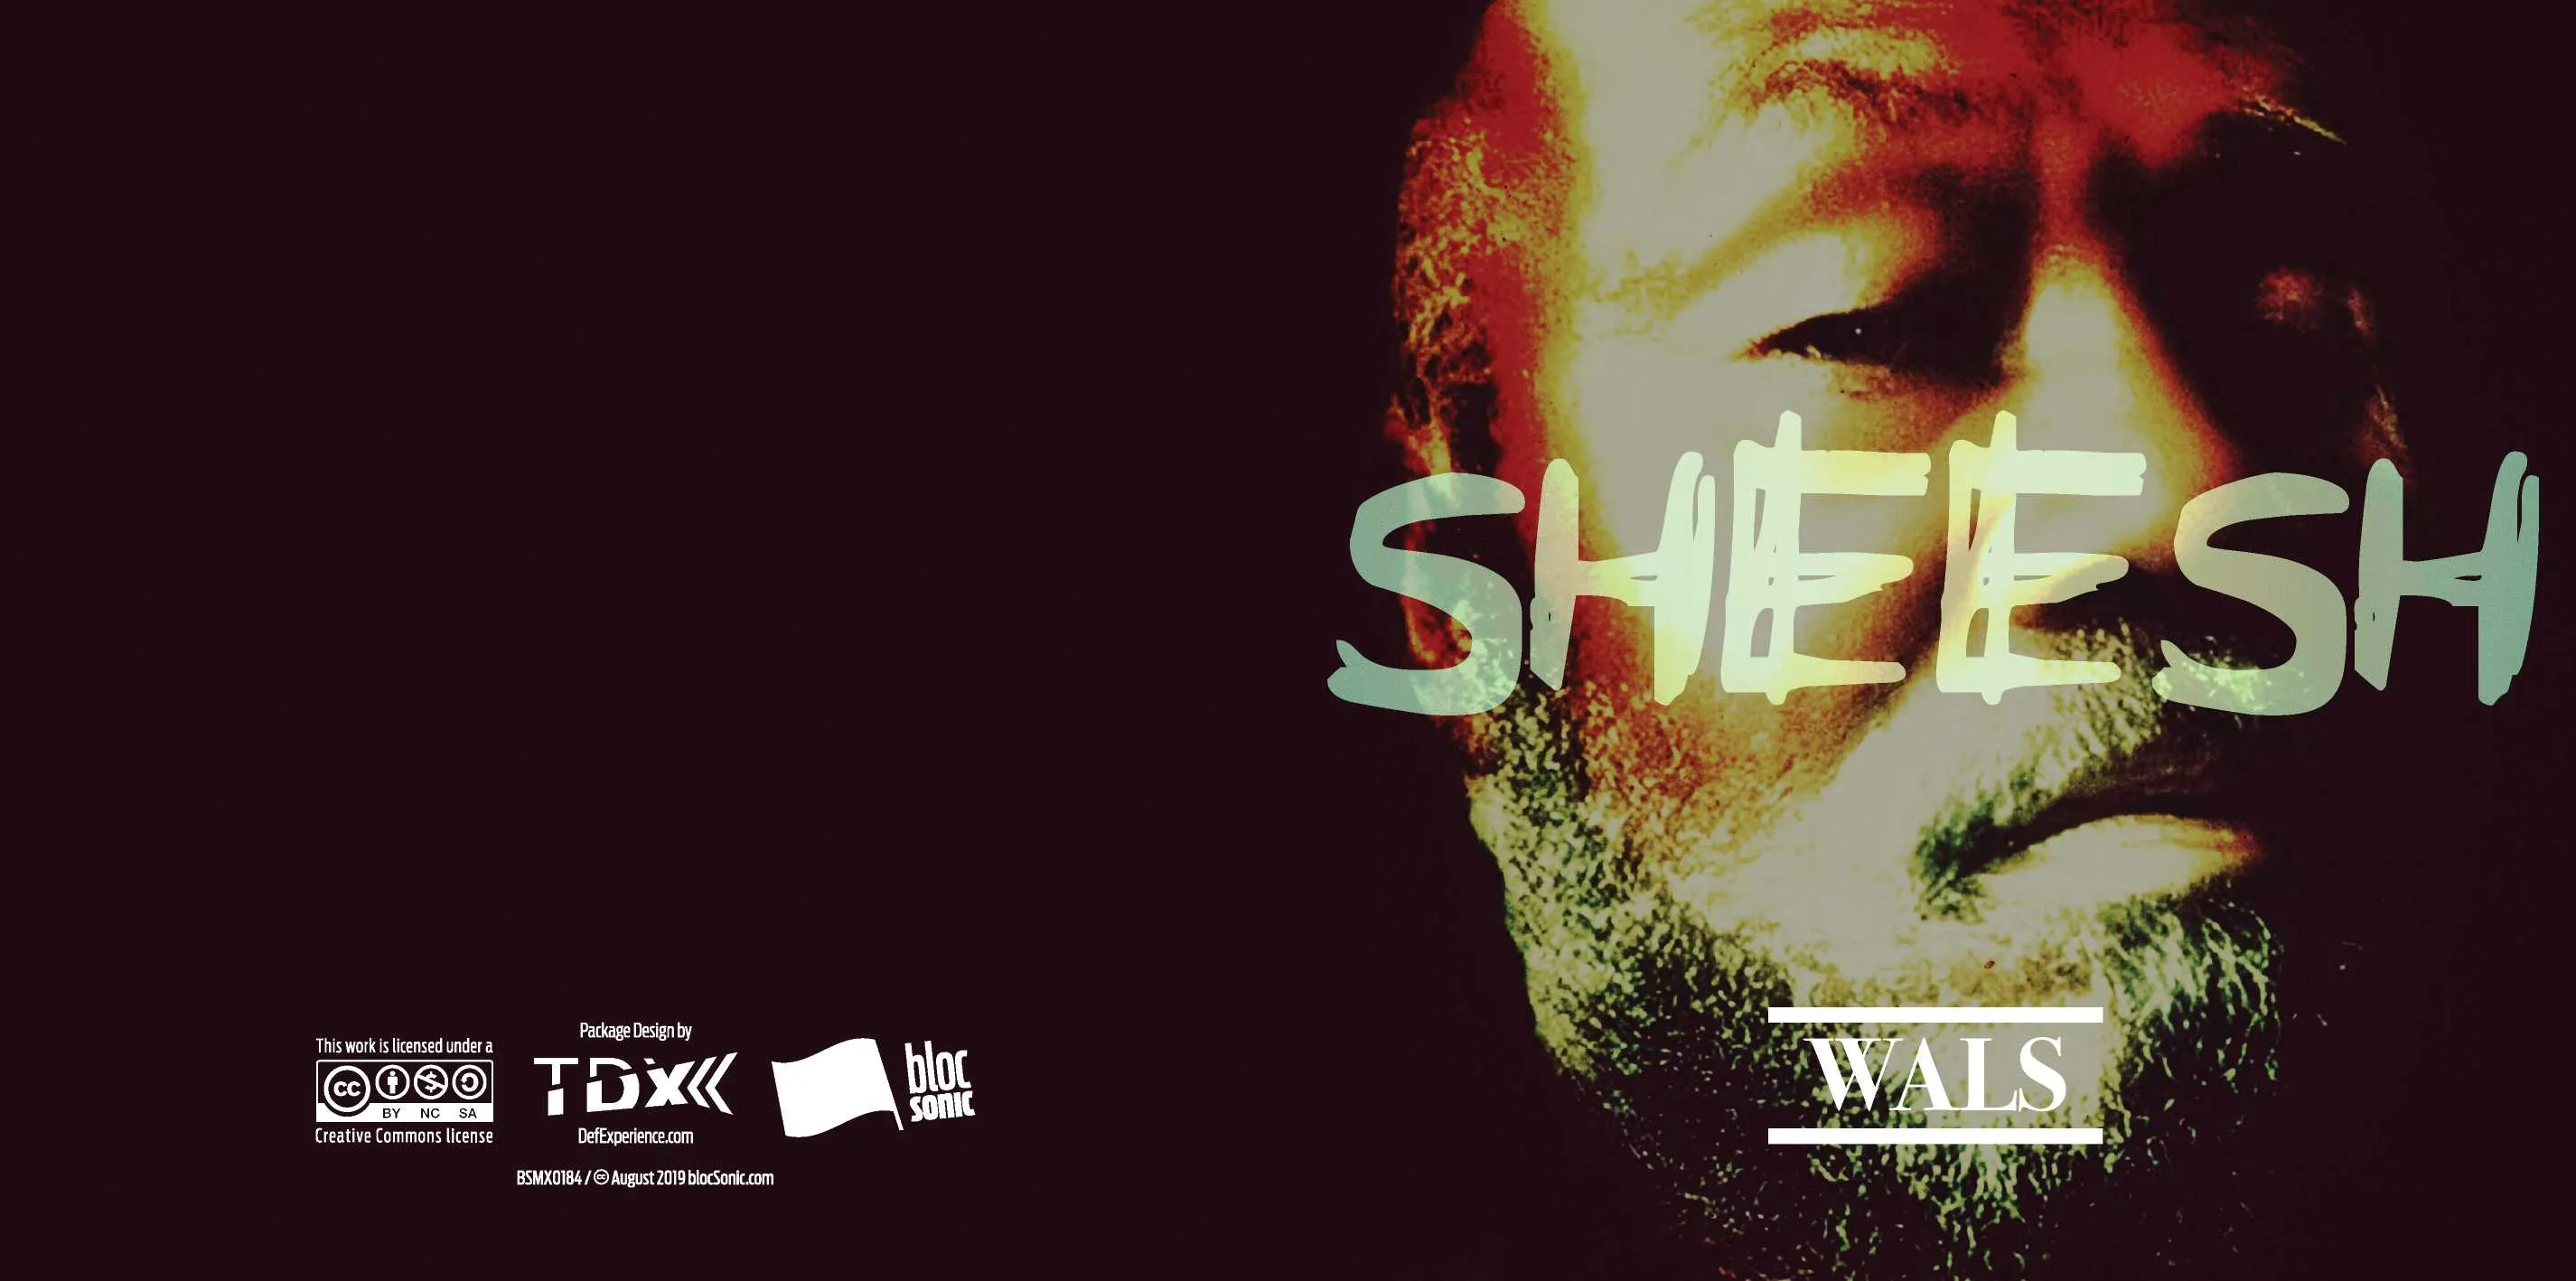 Album insert for “SHEESH” by Wals